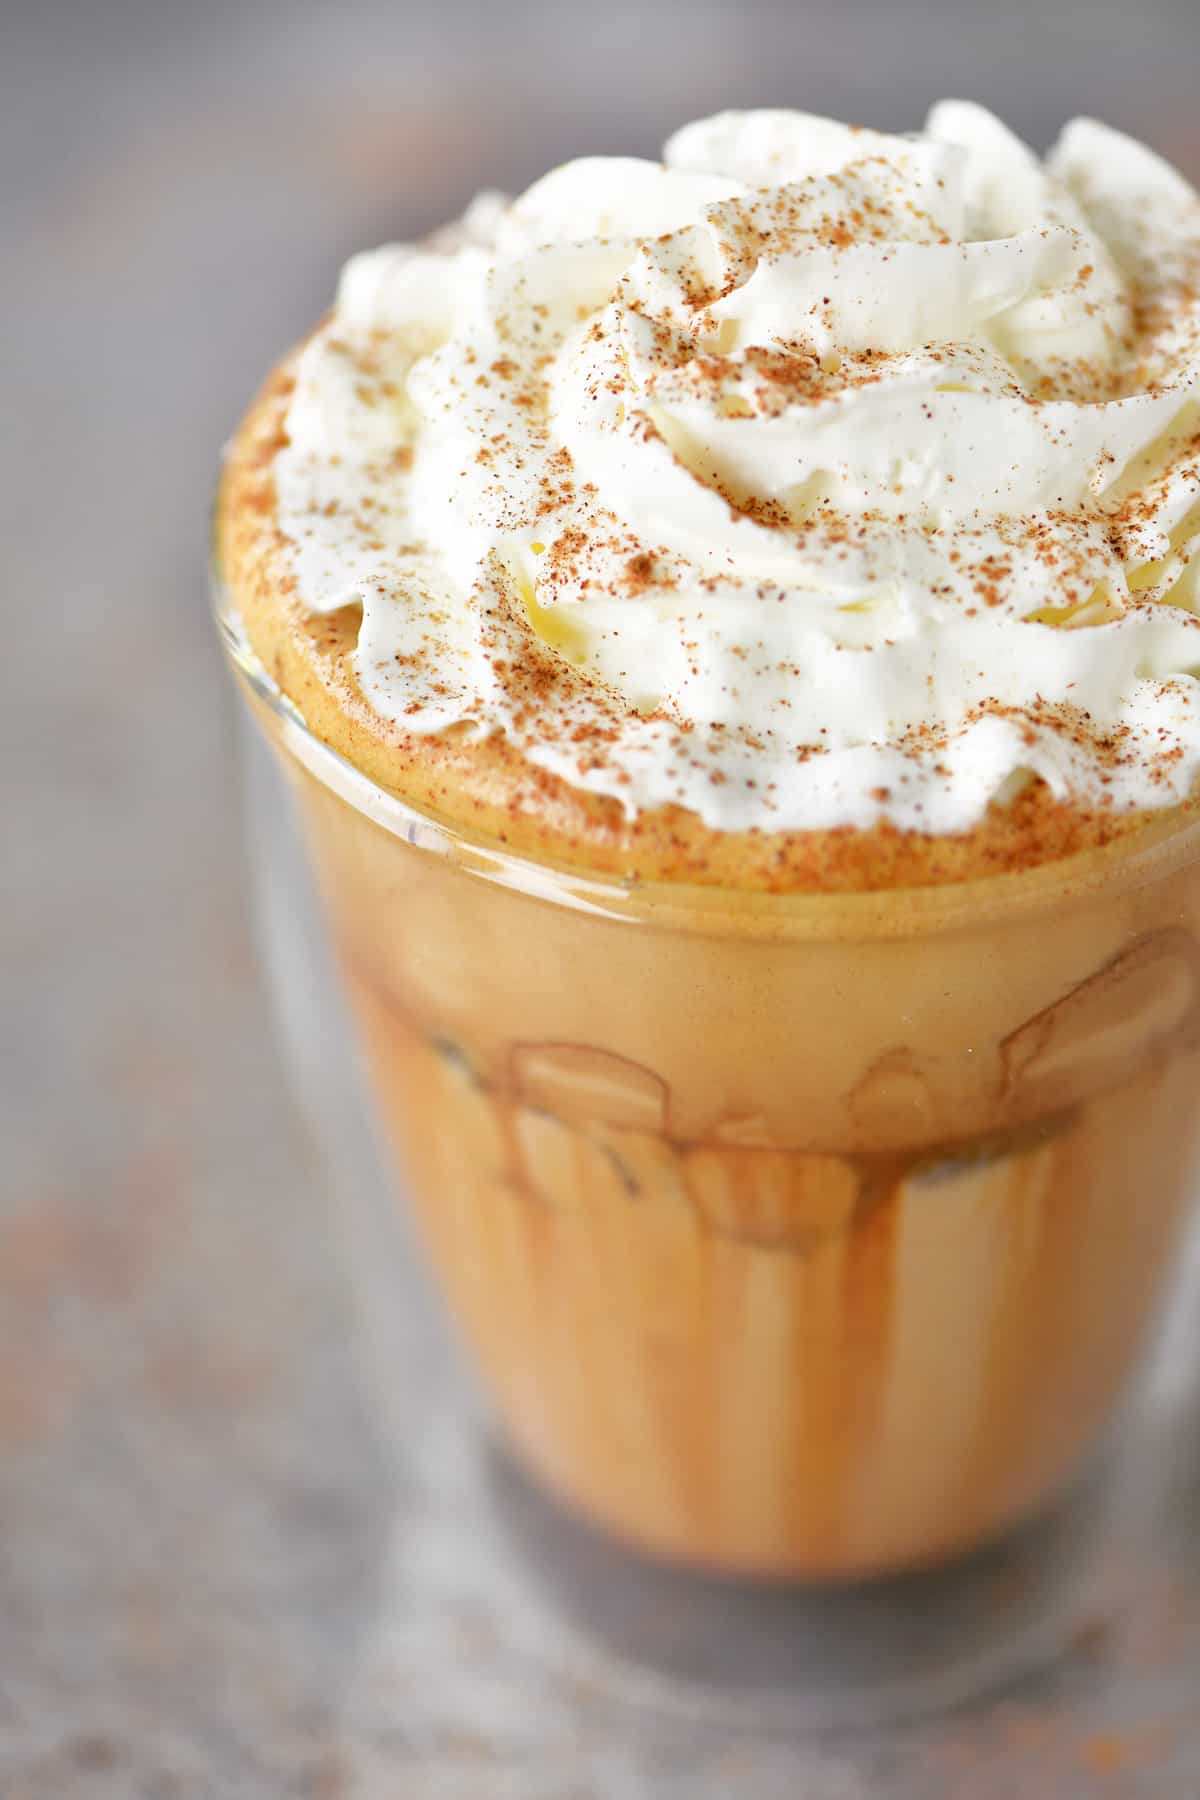 Iced pumpkin spice latte with whipped cream on top.